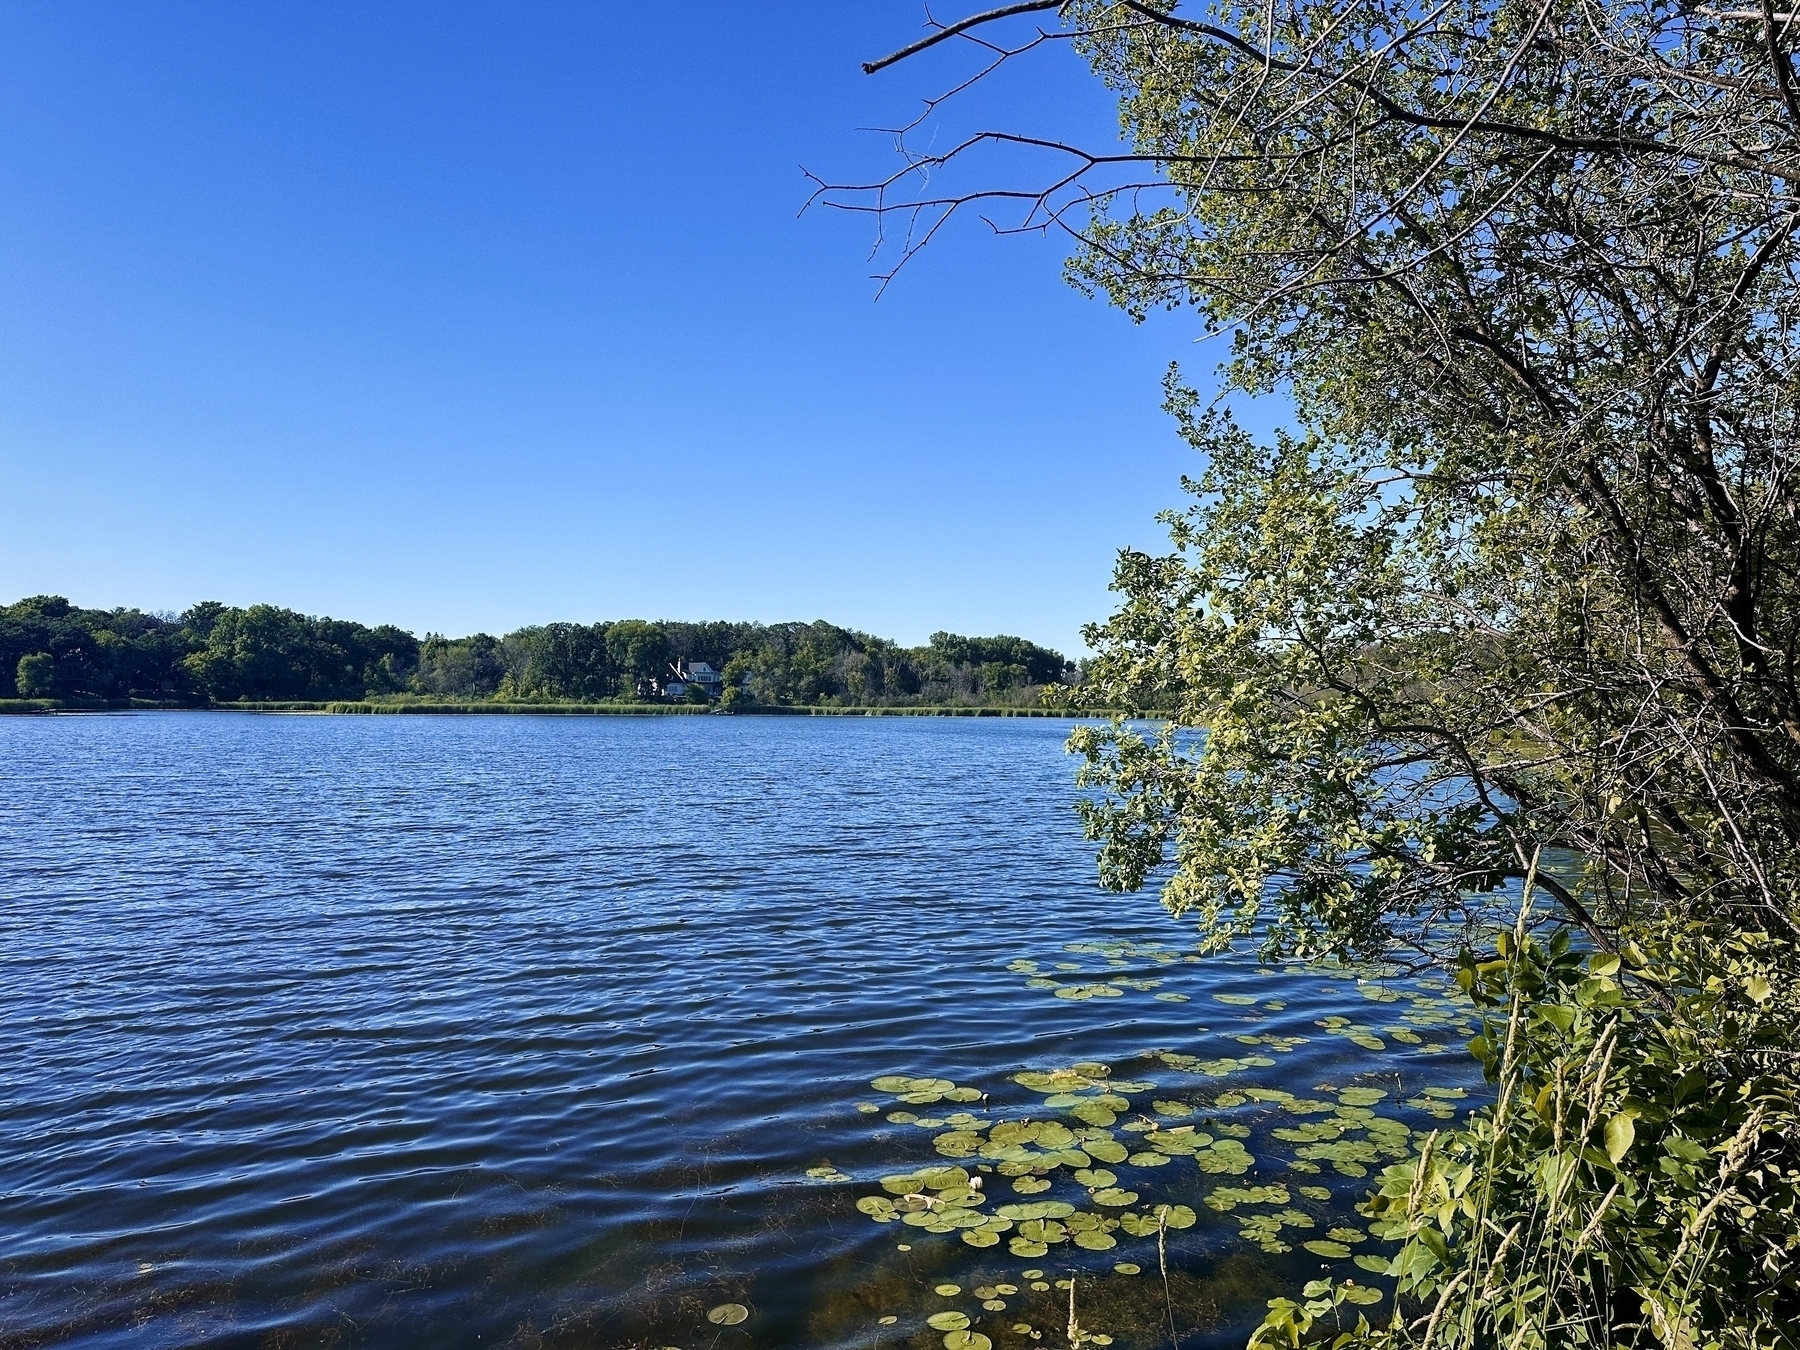 A calm lake with rippling water bordered by lily pads and shoreline trees under a clear blue sky with a distant forest and a house across the water.